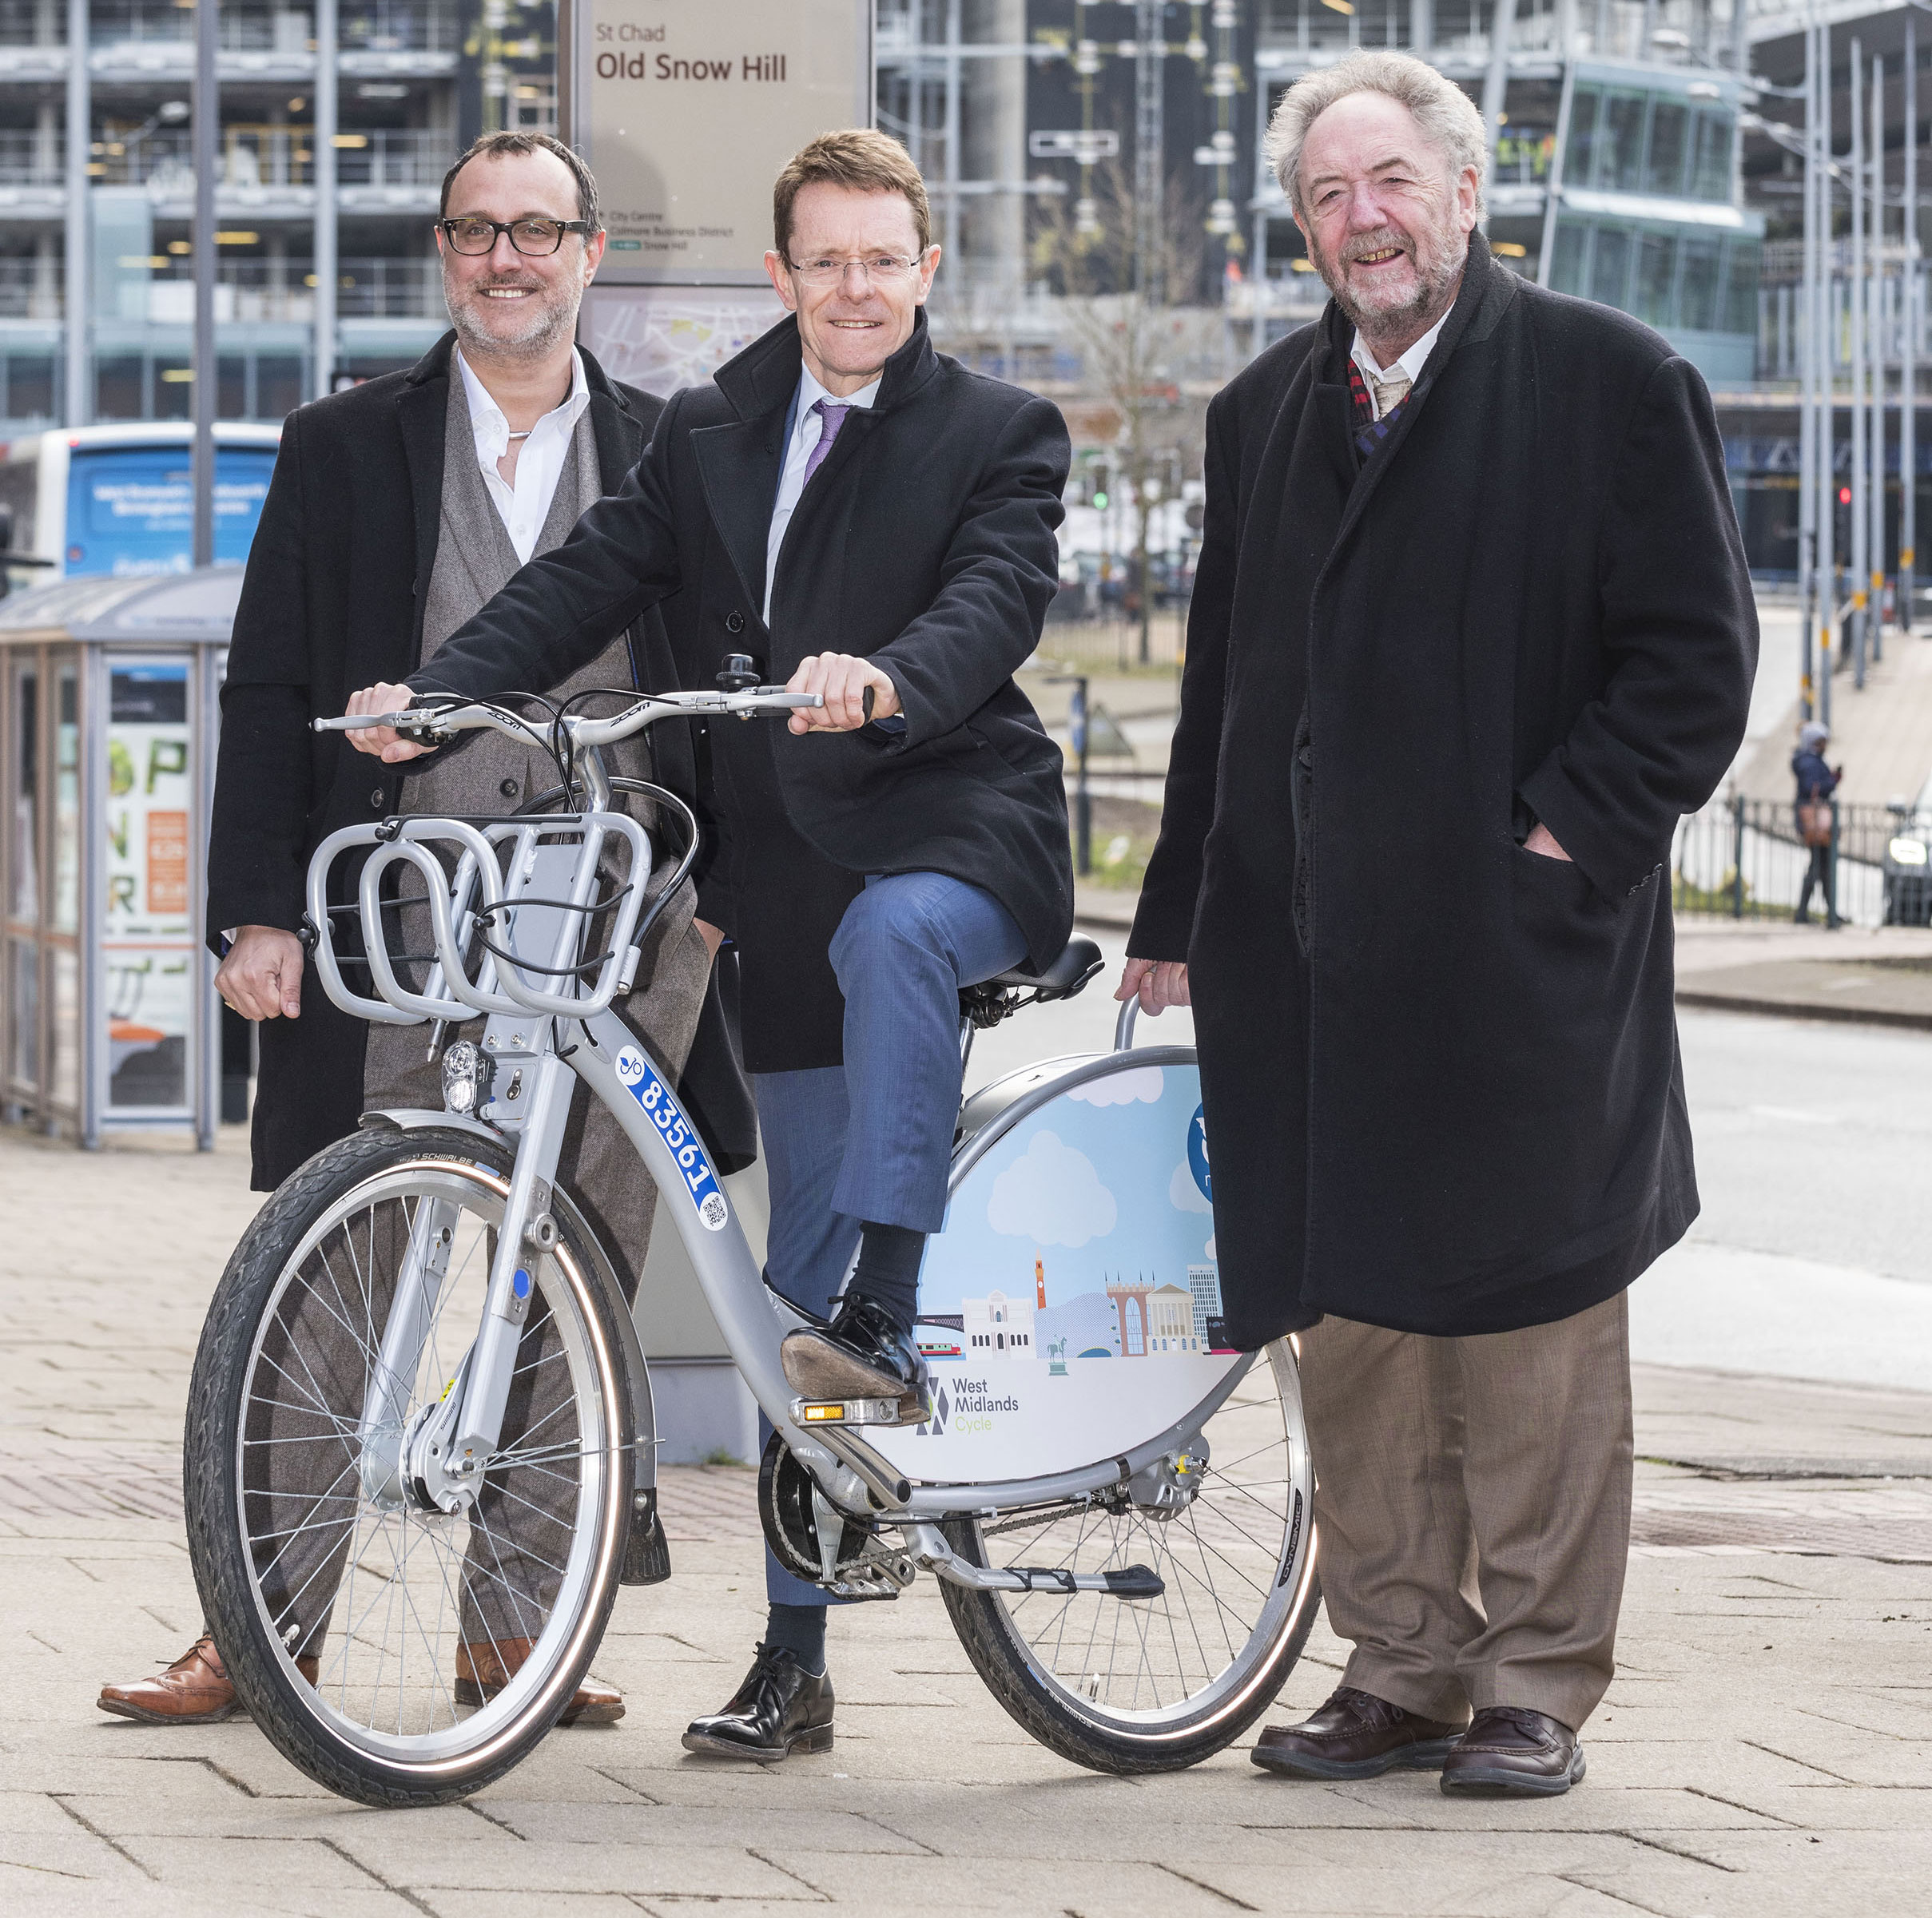 Nextbike MD Julian Scriven, Mayor of the West Midlands Andy Street and leader of the City of Wolverhampton Council Roger Lawrence